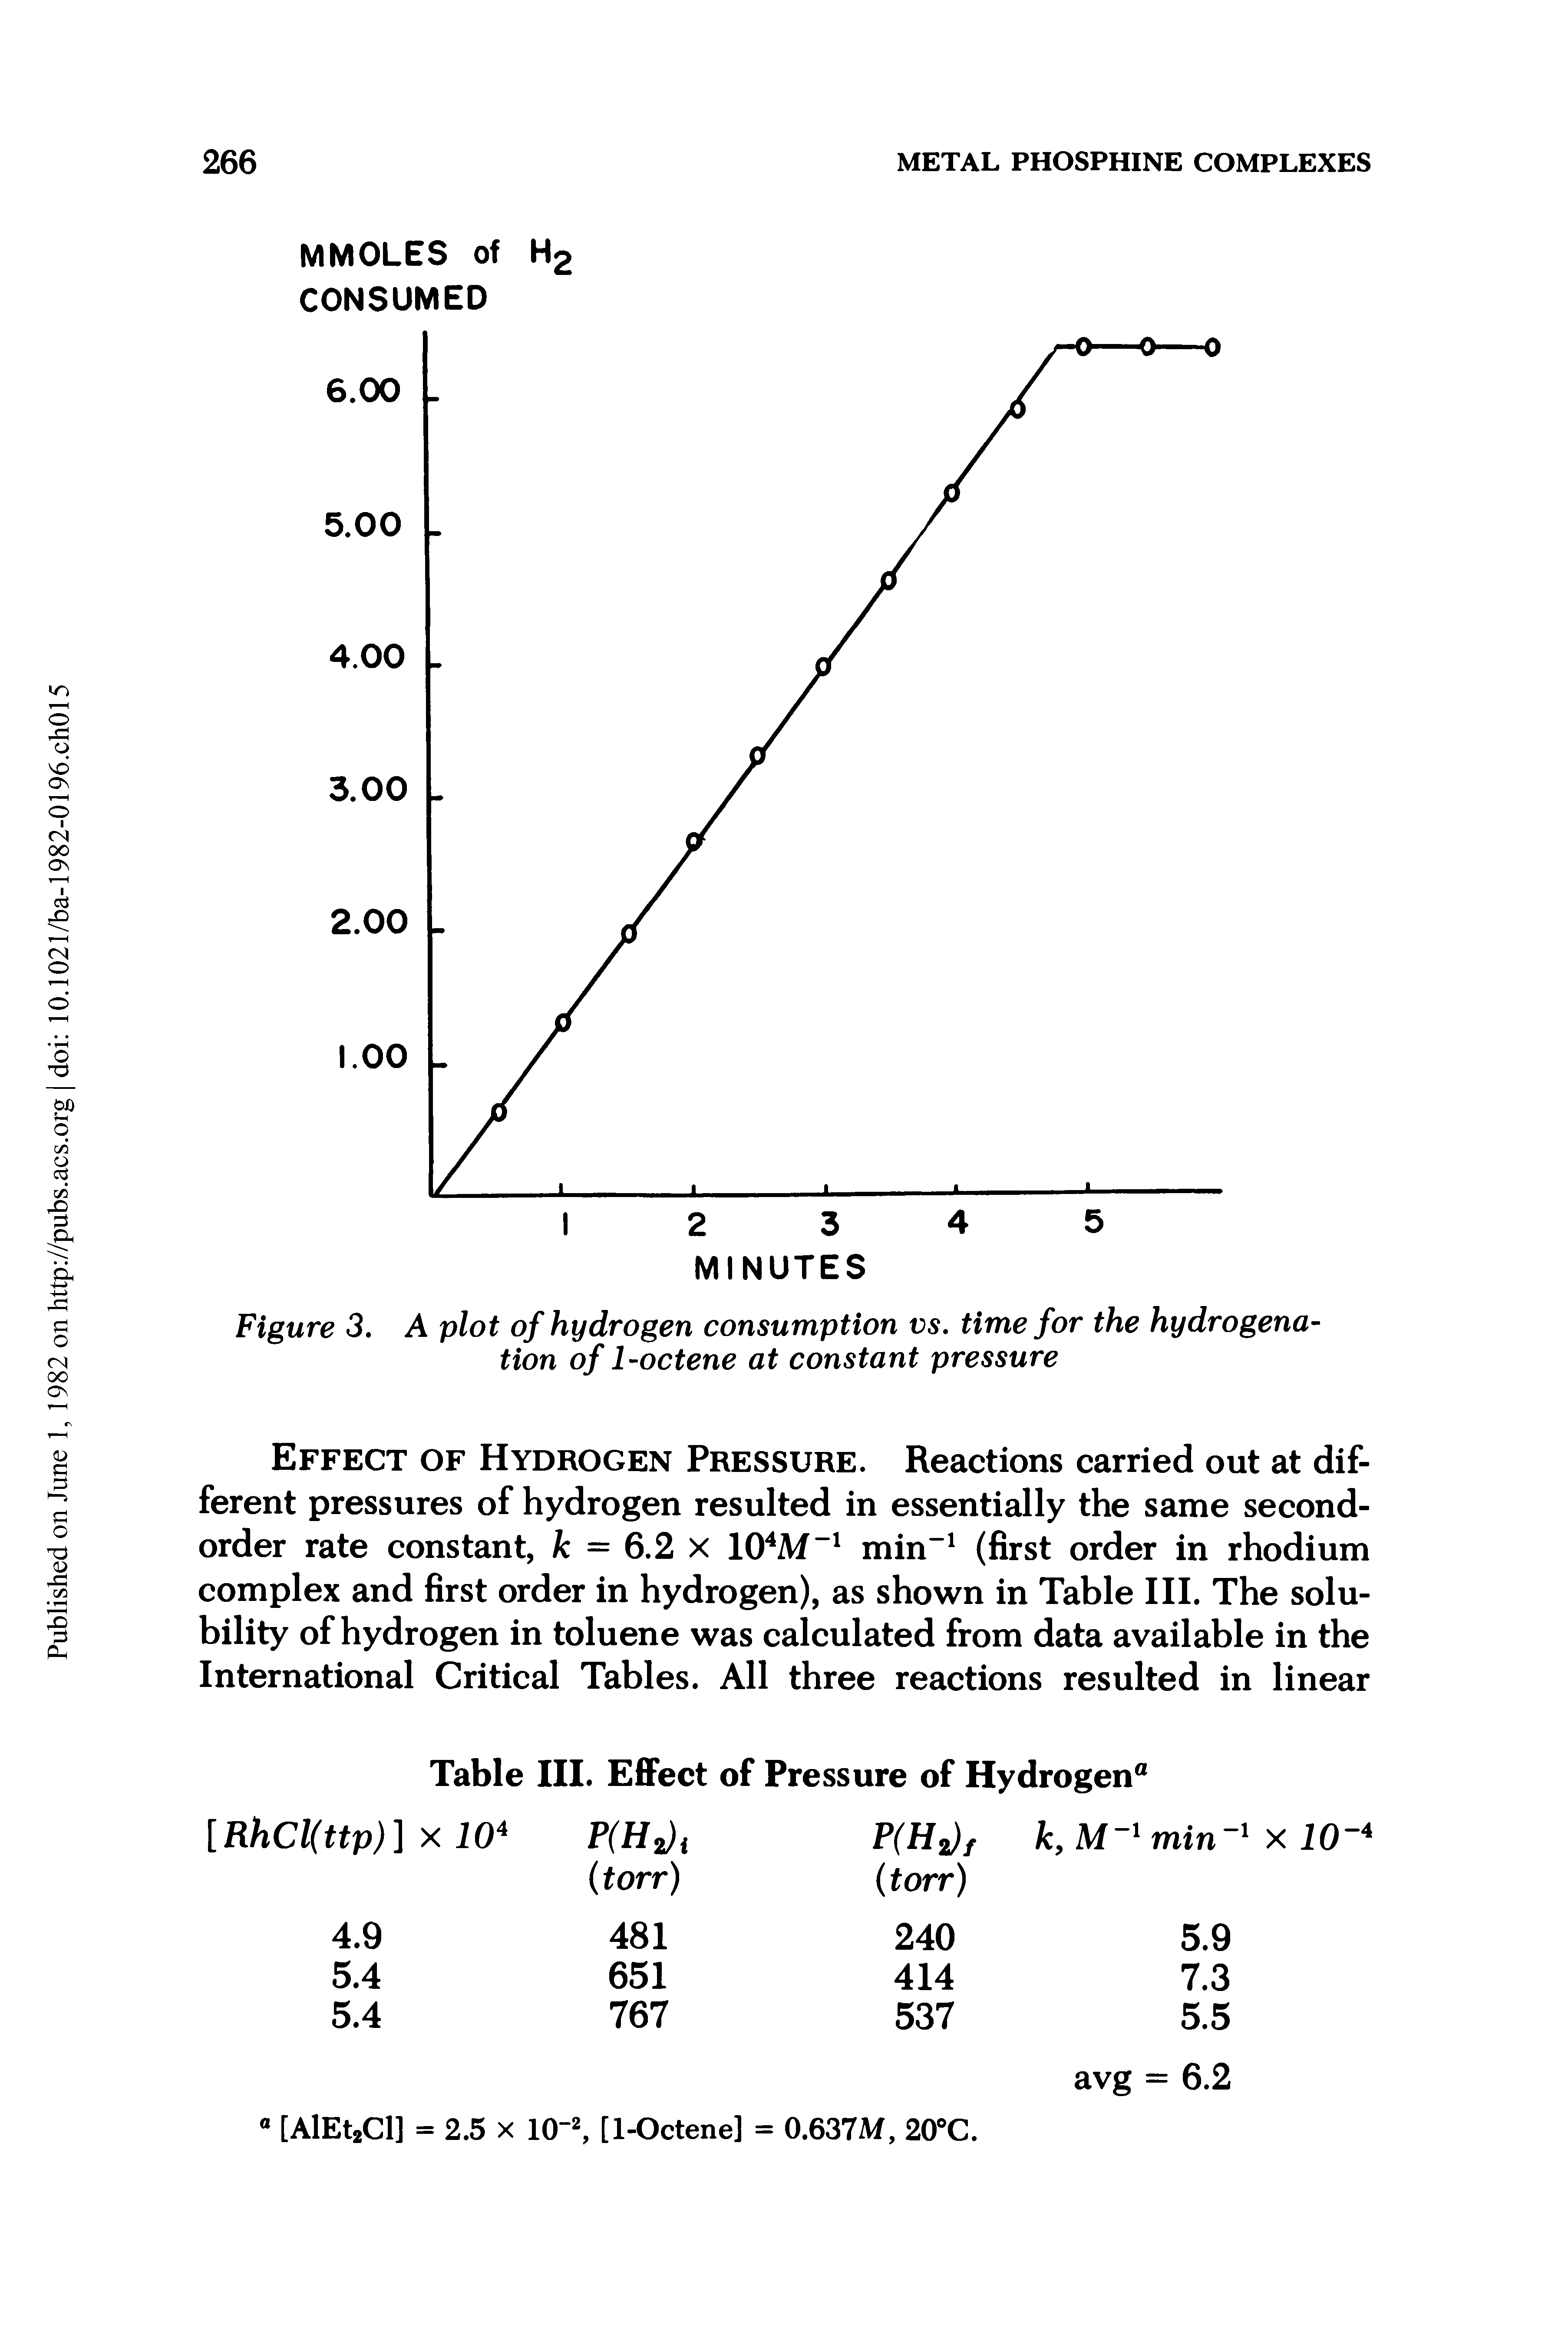 Figure 3. A plot of hydrogen consumption vs. time for the hydrogenation of 1-octene at constant pressure...